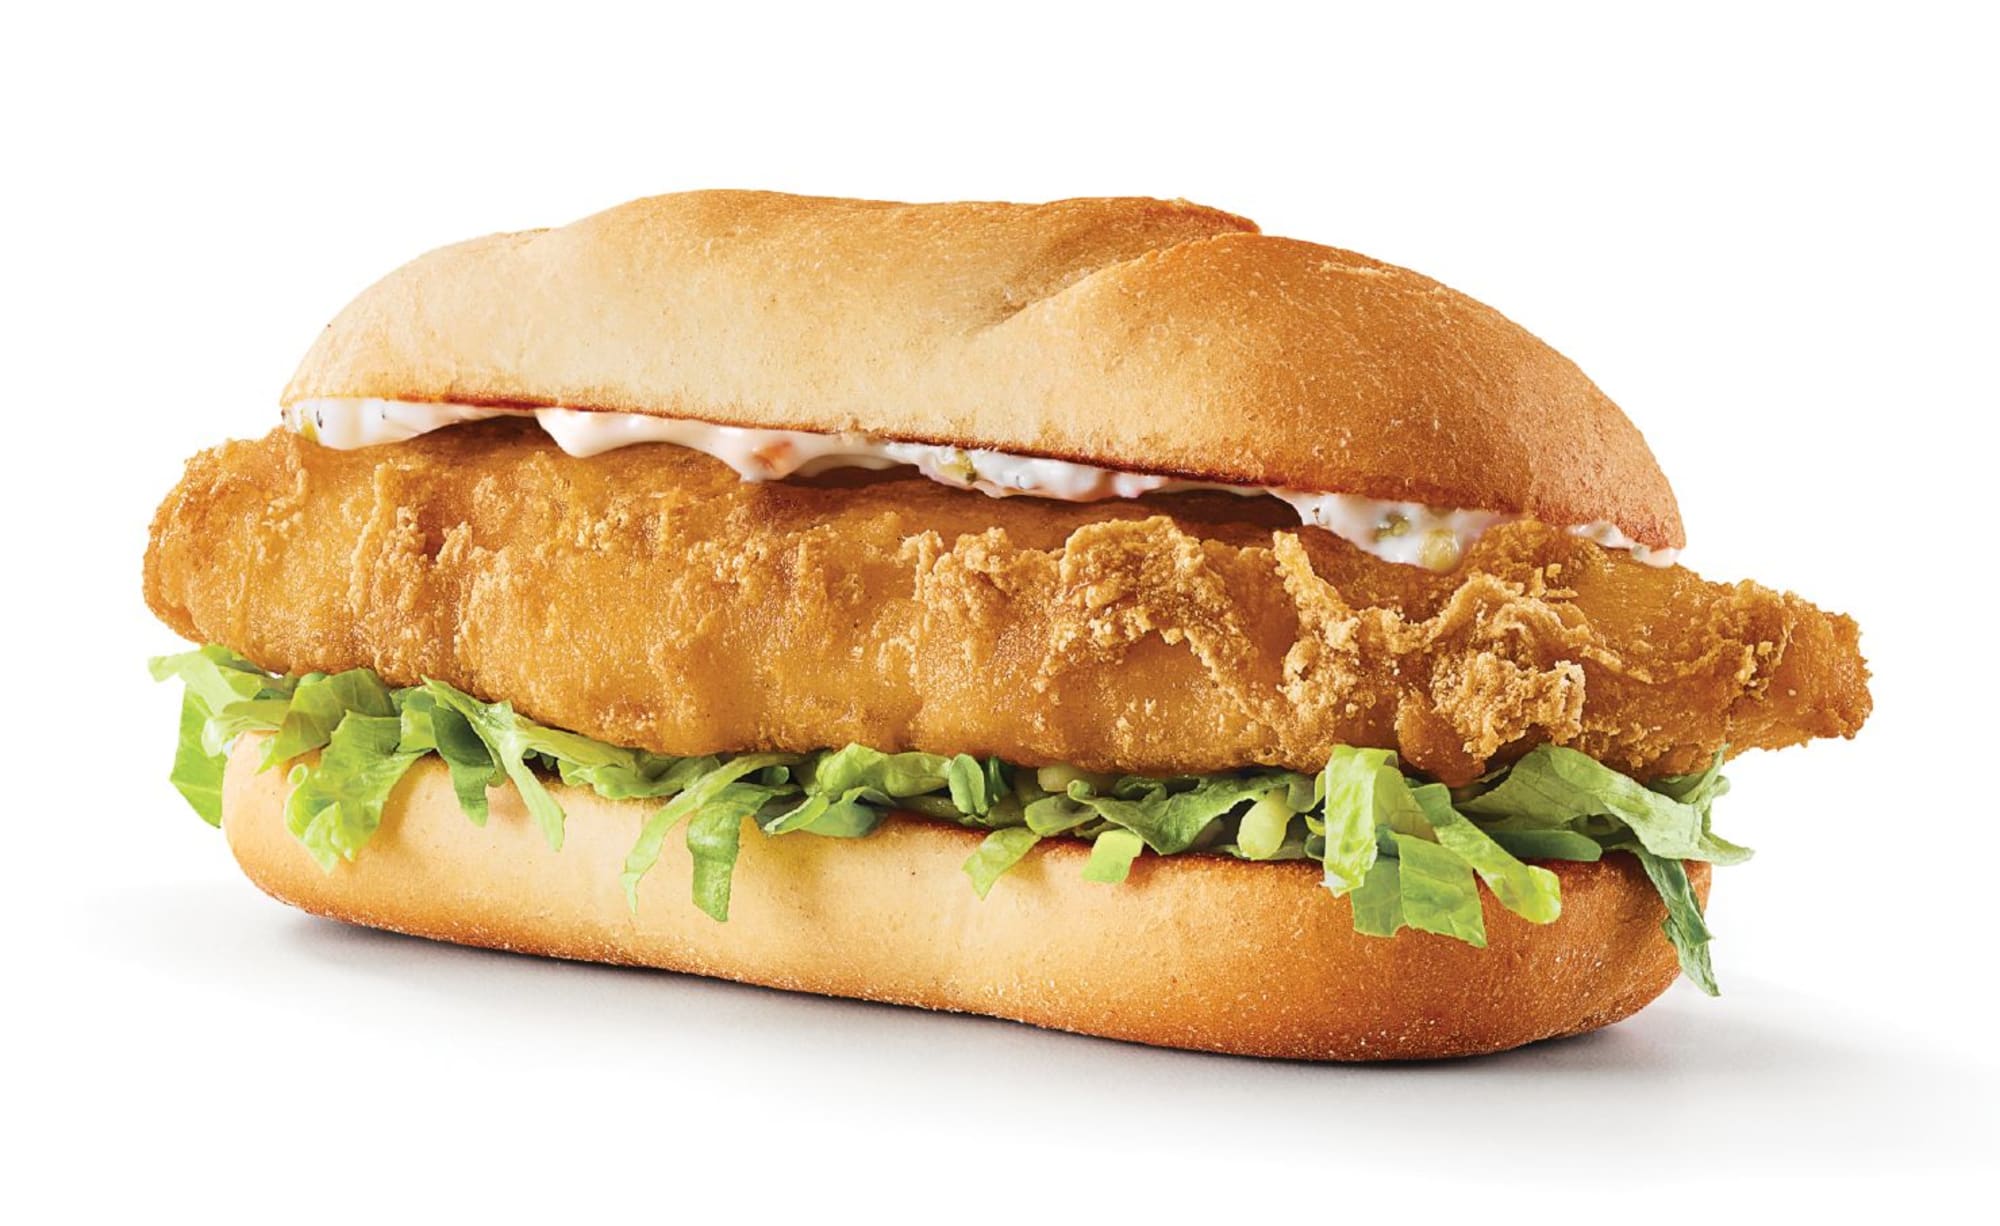 Best fish sandwiches for Lent Ready to hook a tasty choice?